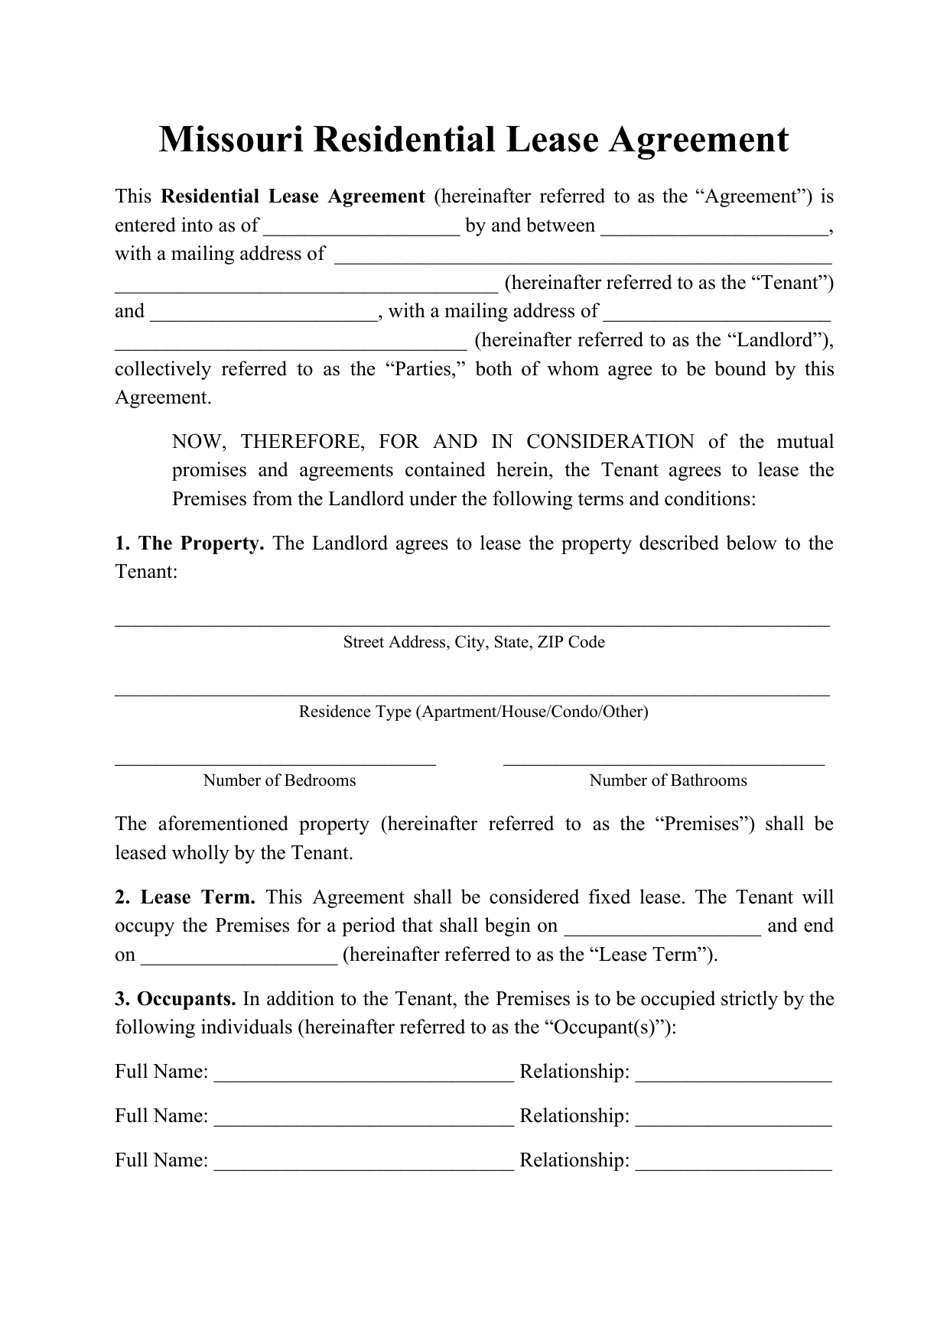 Residential Lease Agreement Template - Missouri, Page 1